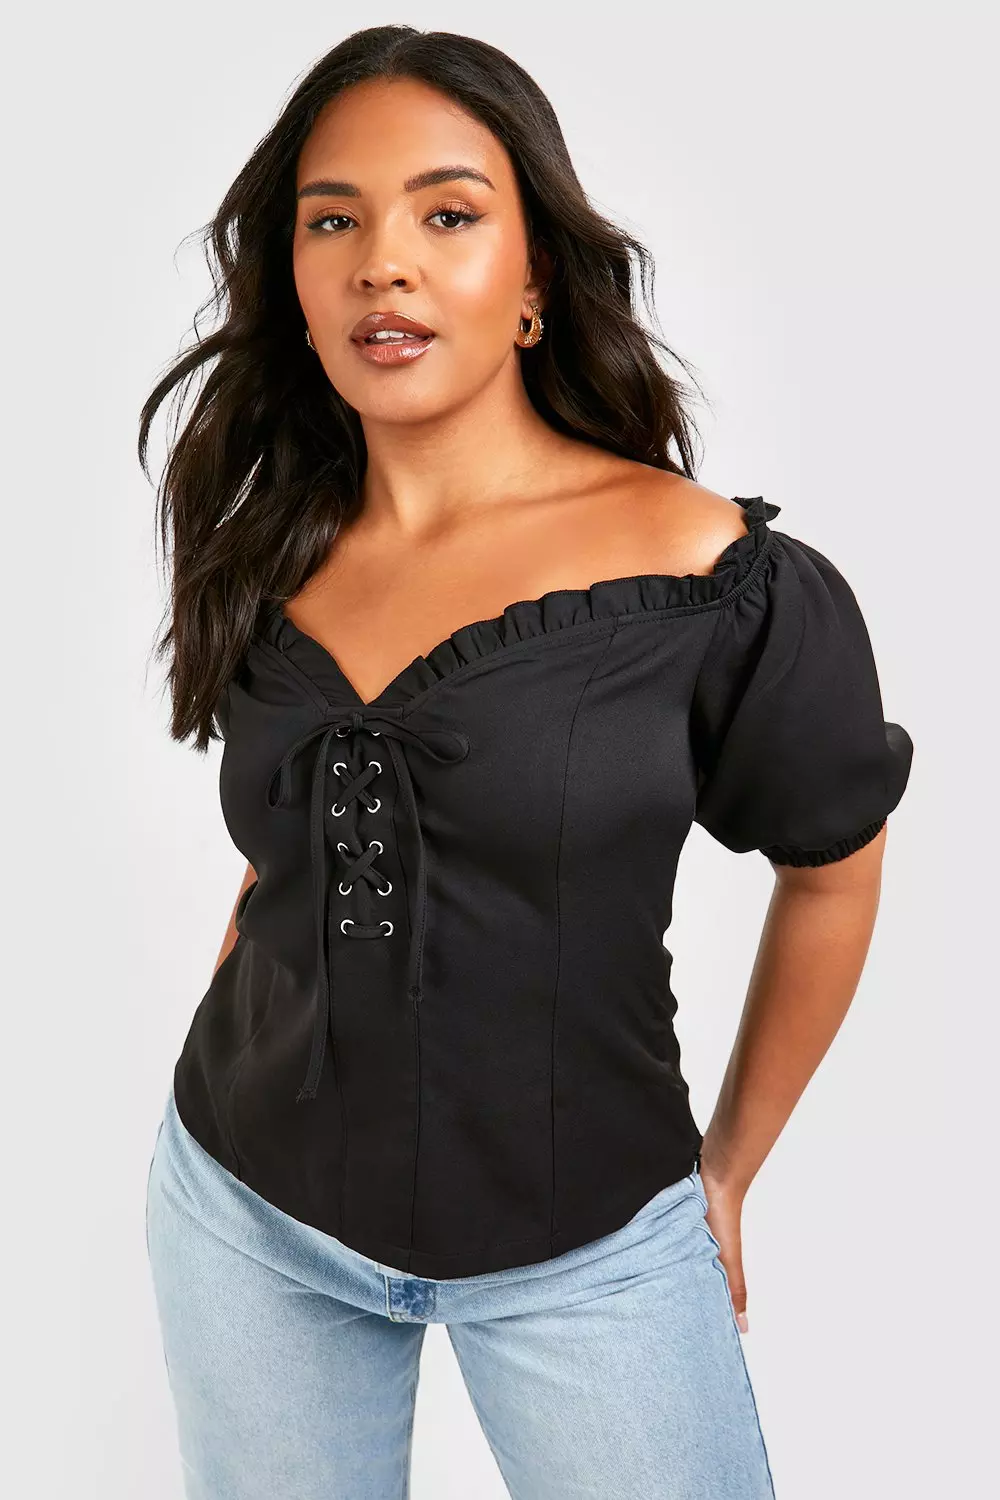 Lace Sweetheart Off Shoulder Top | boohoo